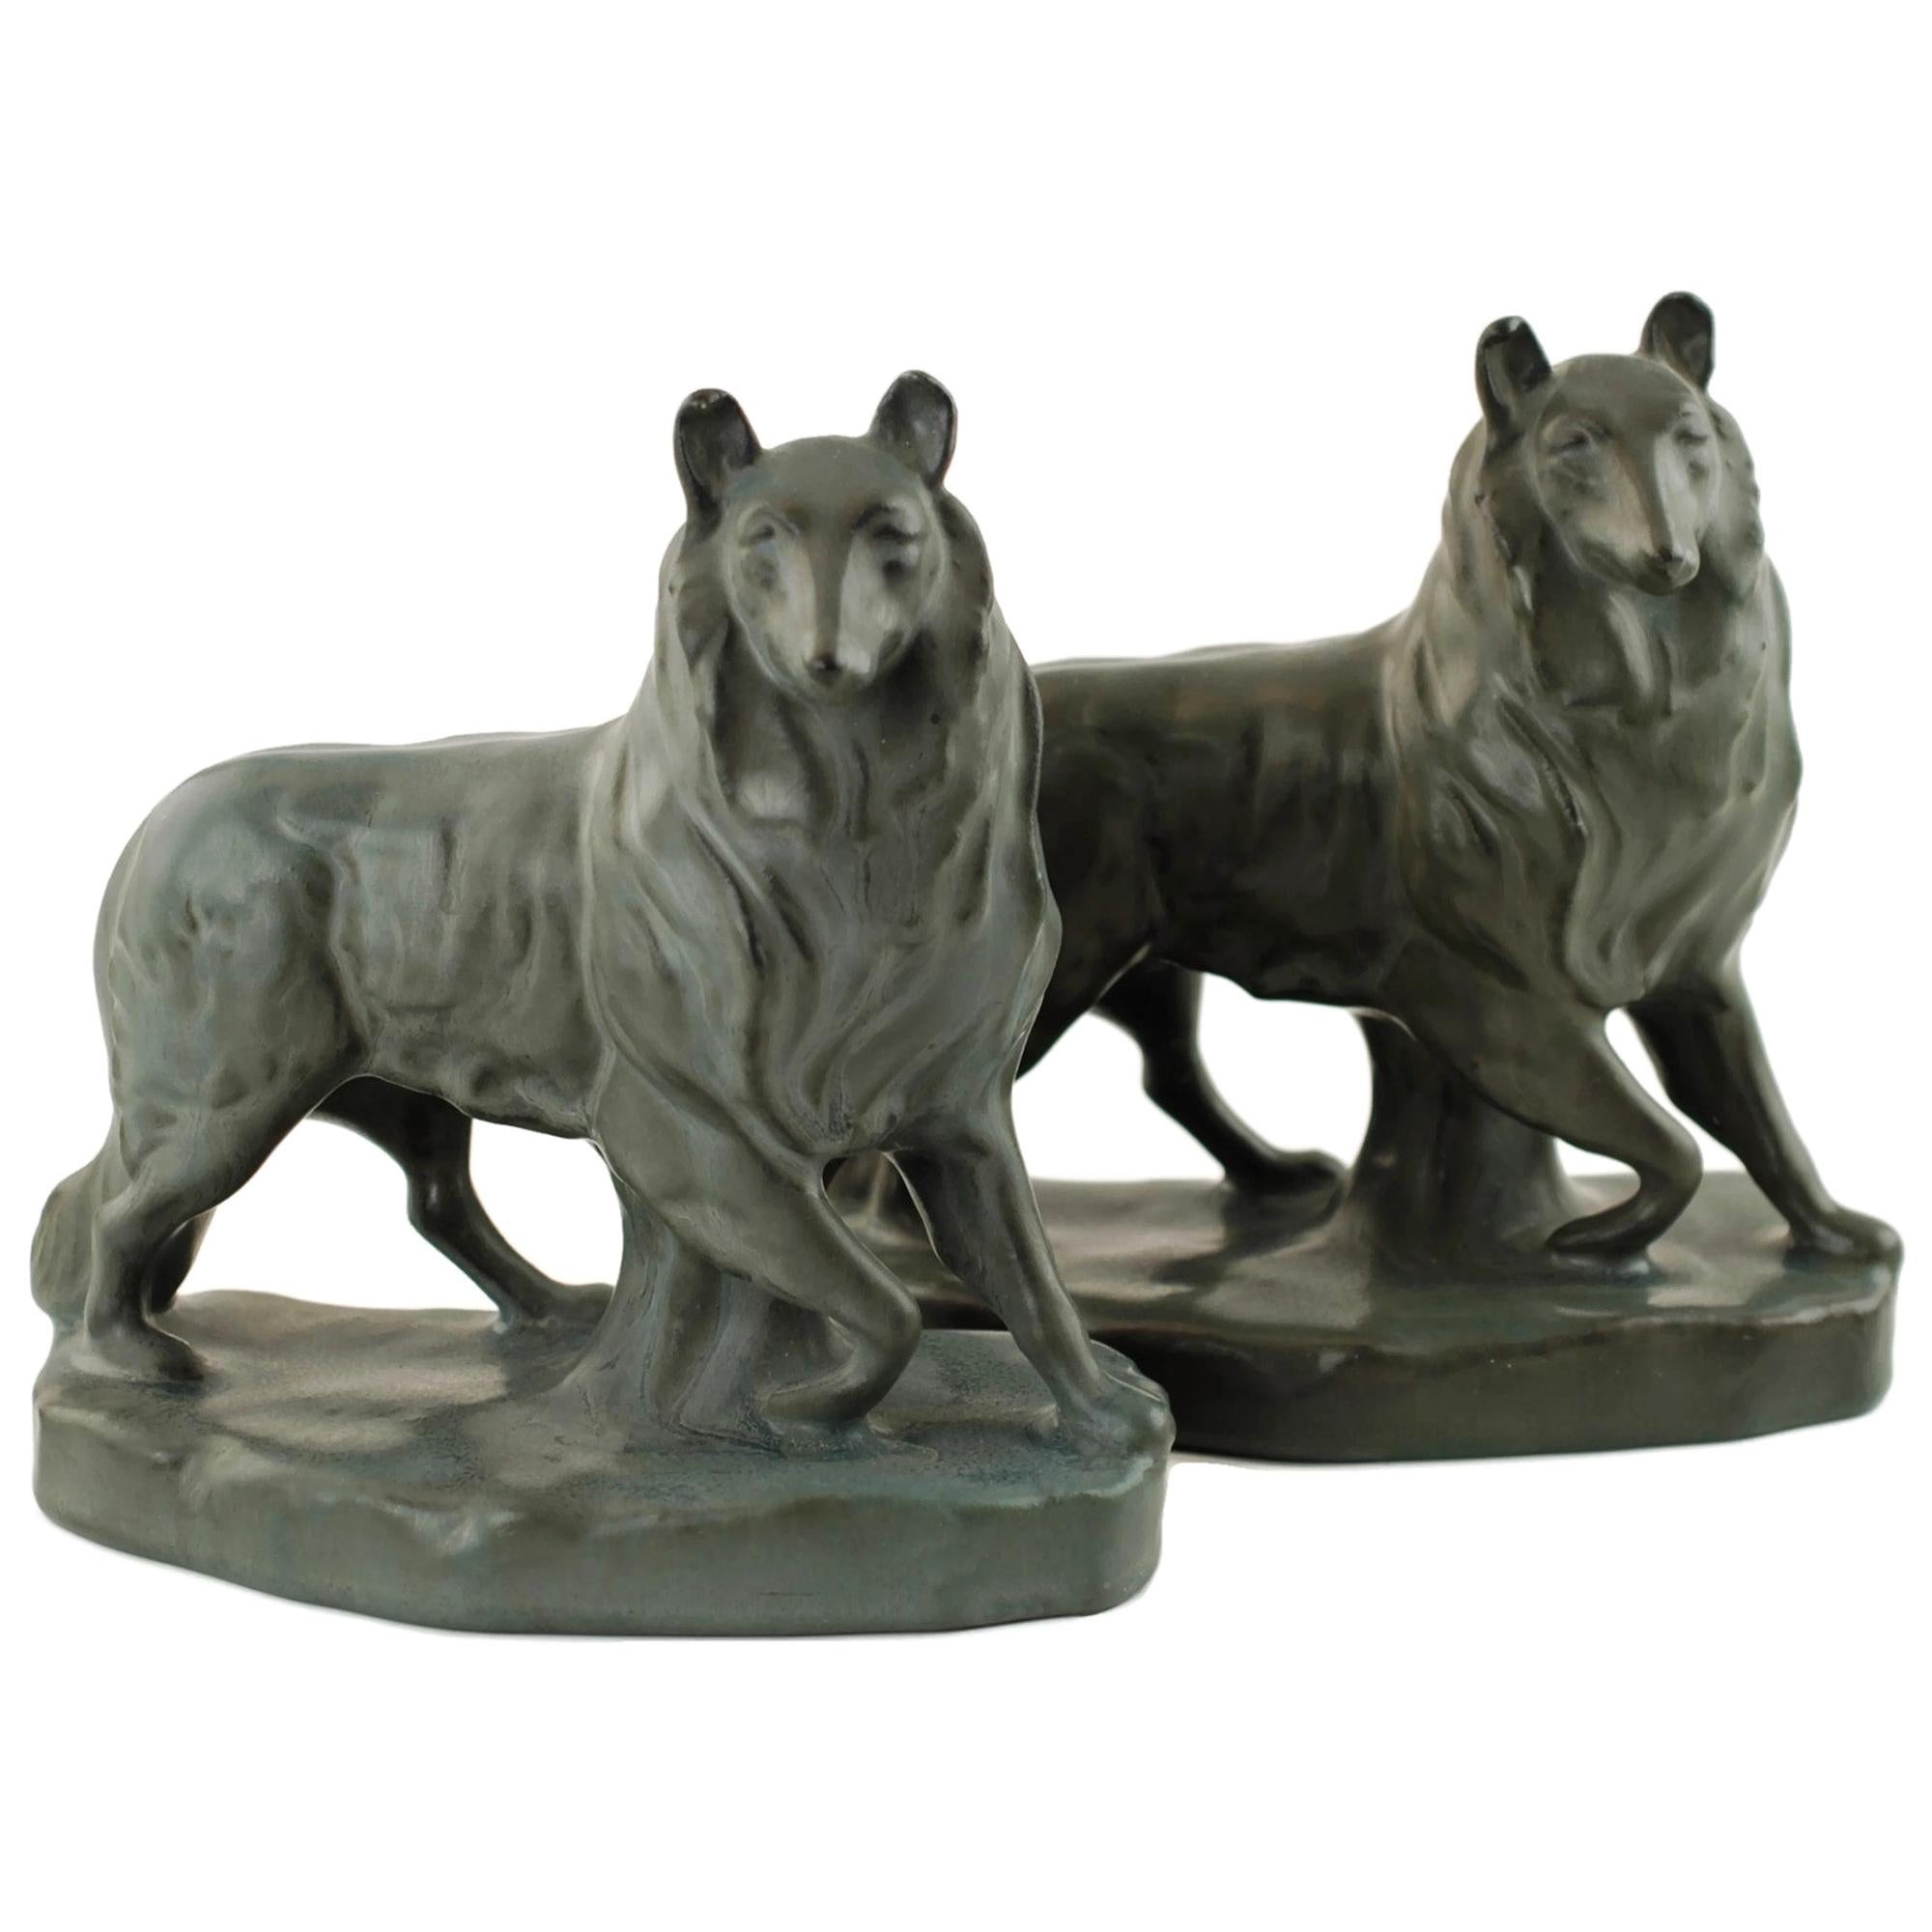 Rookwood Pottery Co. Desk Accessories